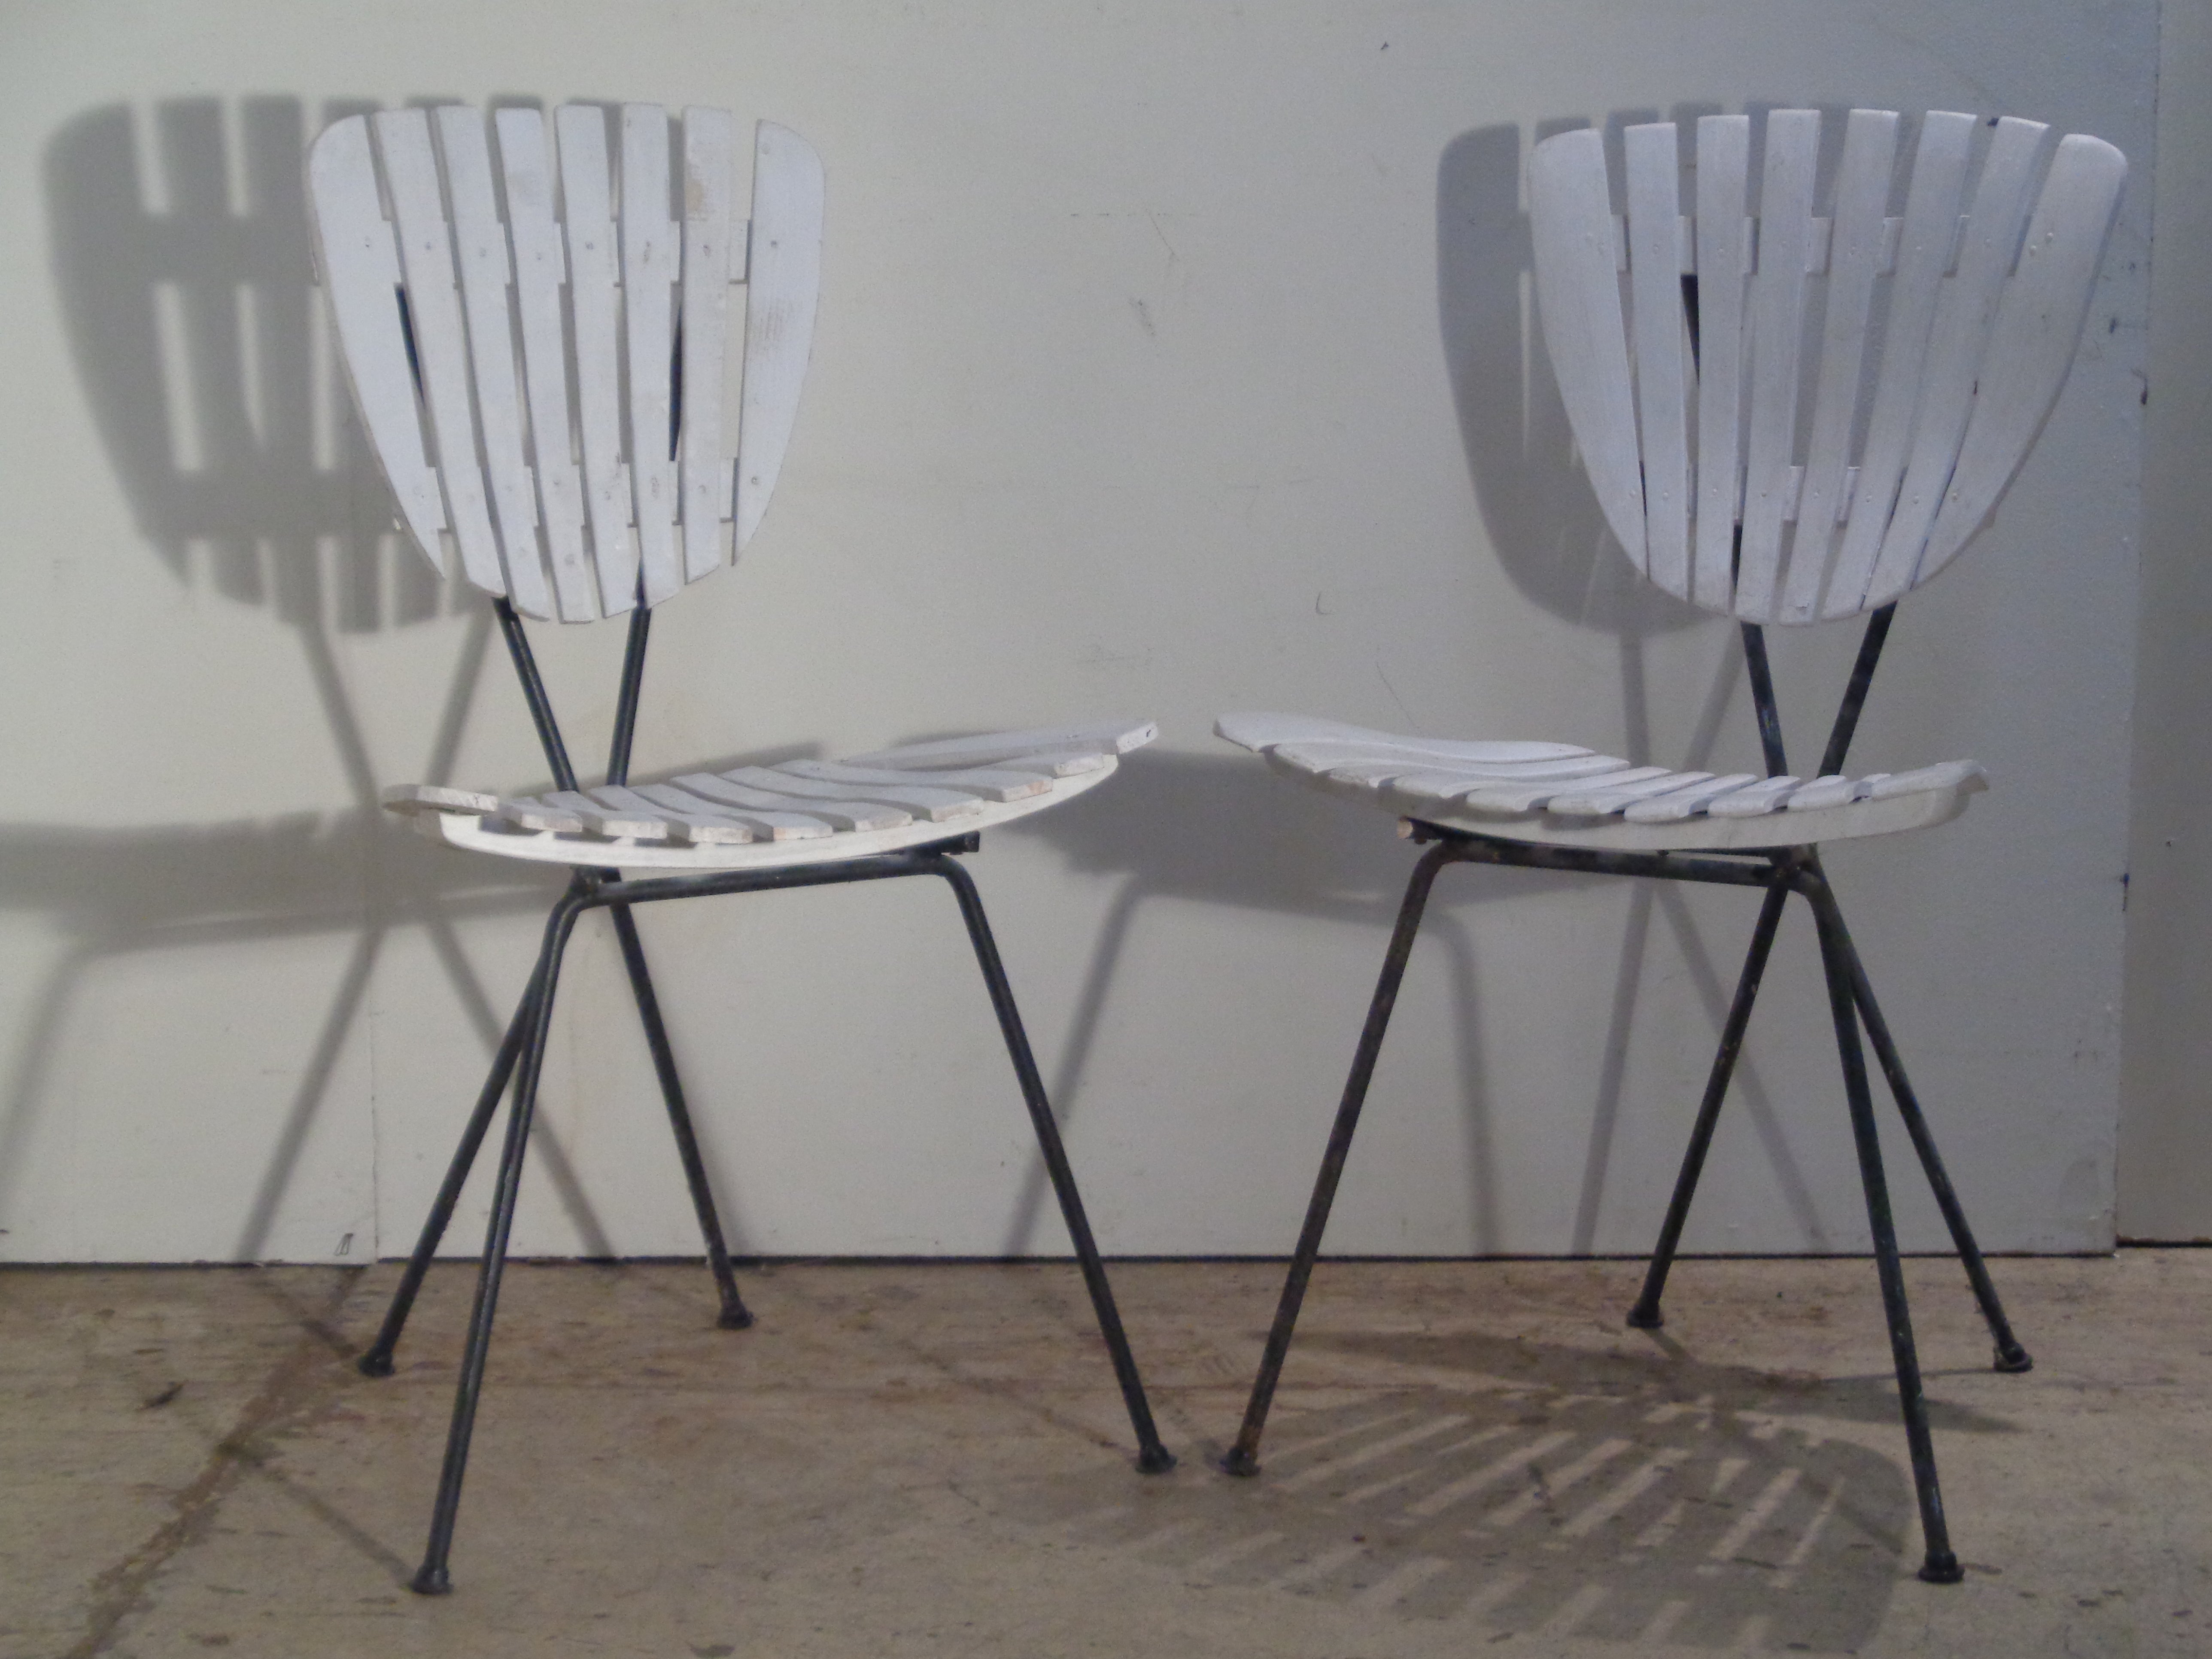 Blackened iron frame wood slat chairs with great sculptural form - designed by Arthur Umanoff. Circa 1960. Look at all pictures and read condition report in comment section. 
 